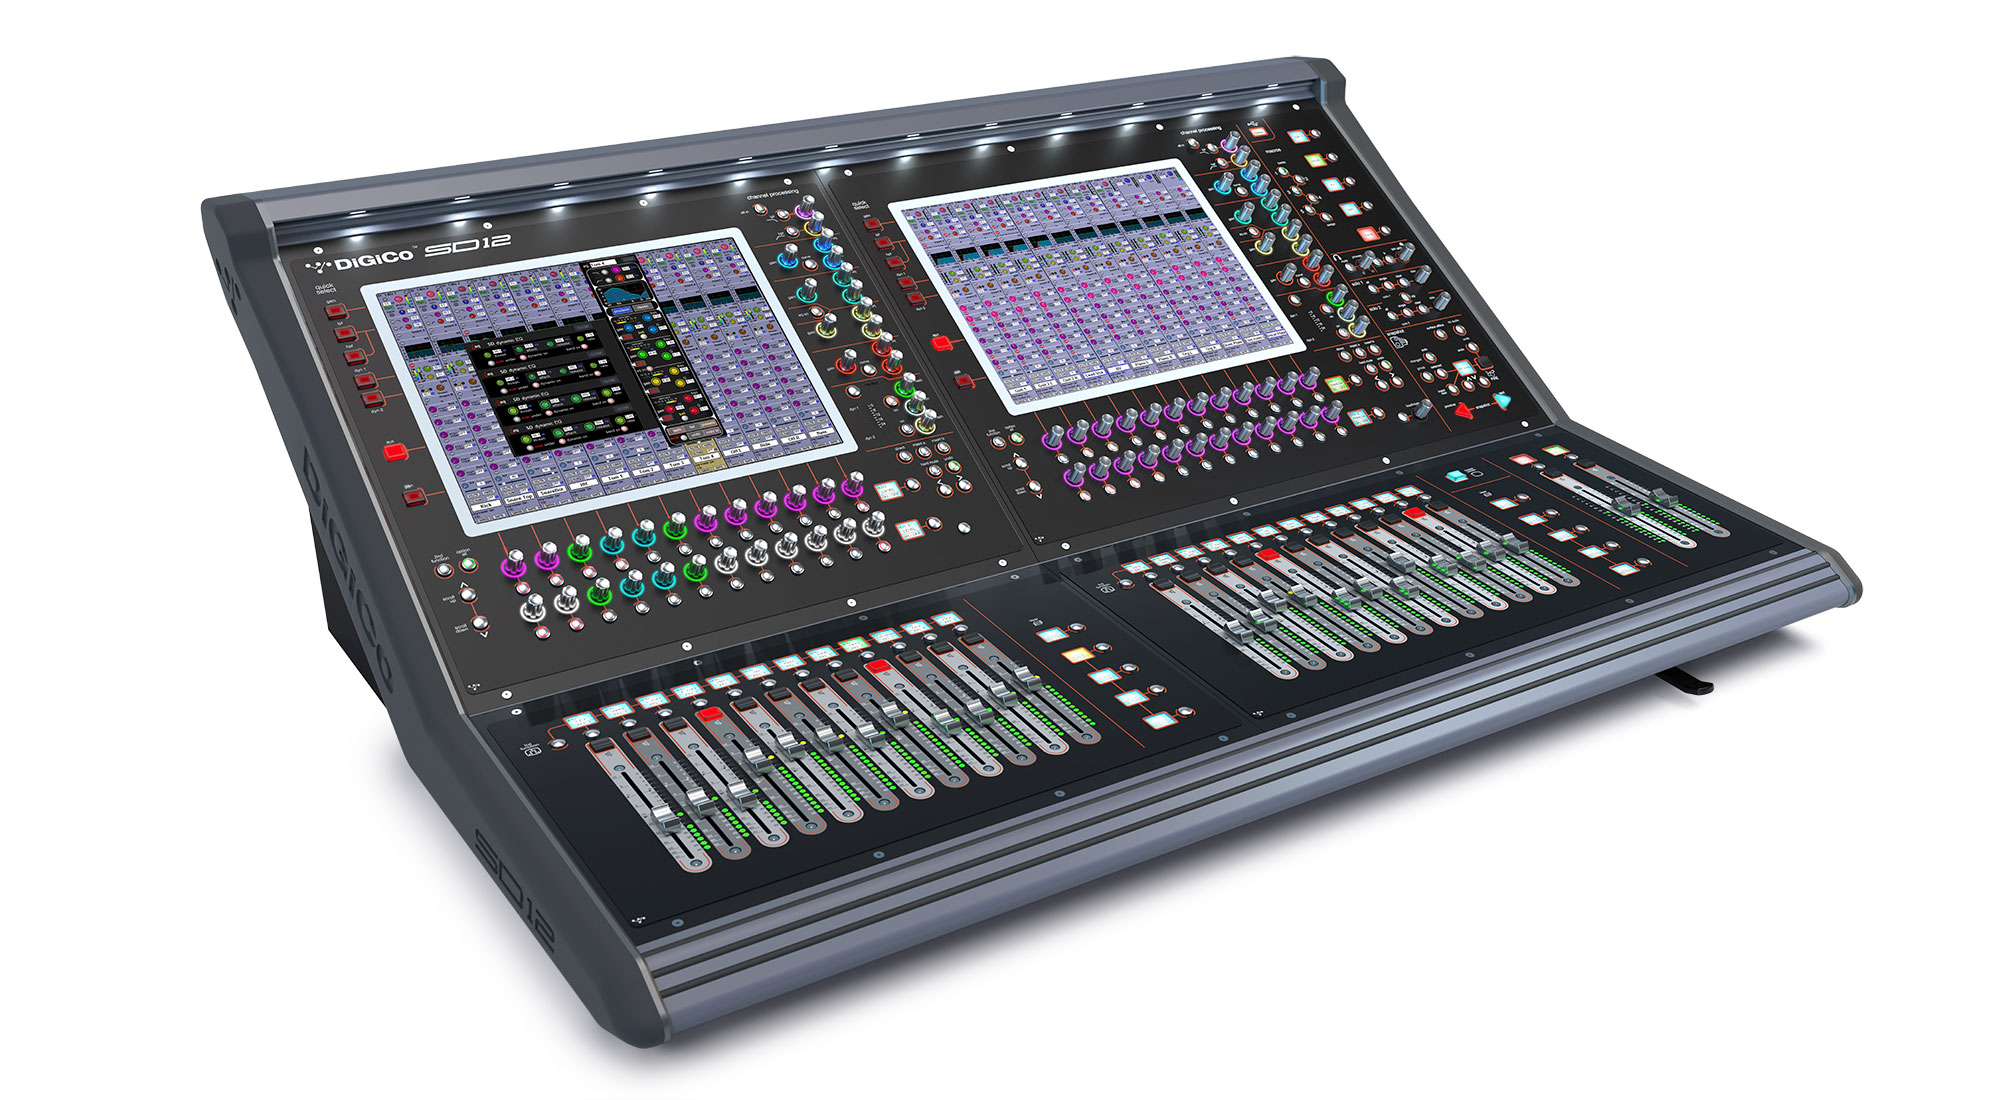 DiGiCo SD12 Console now available at fac365